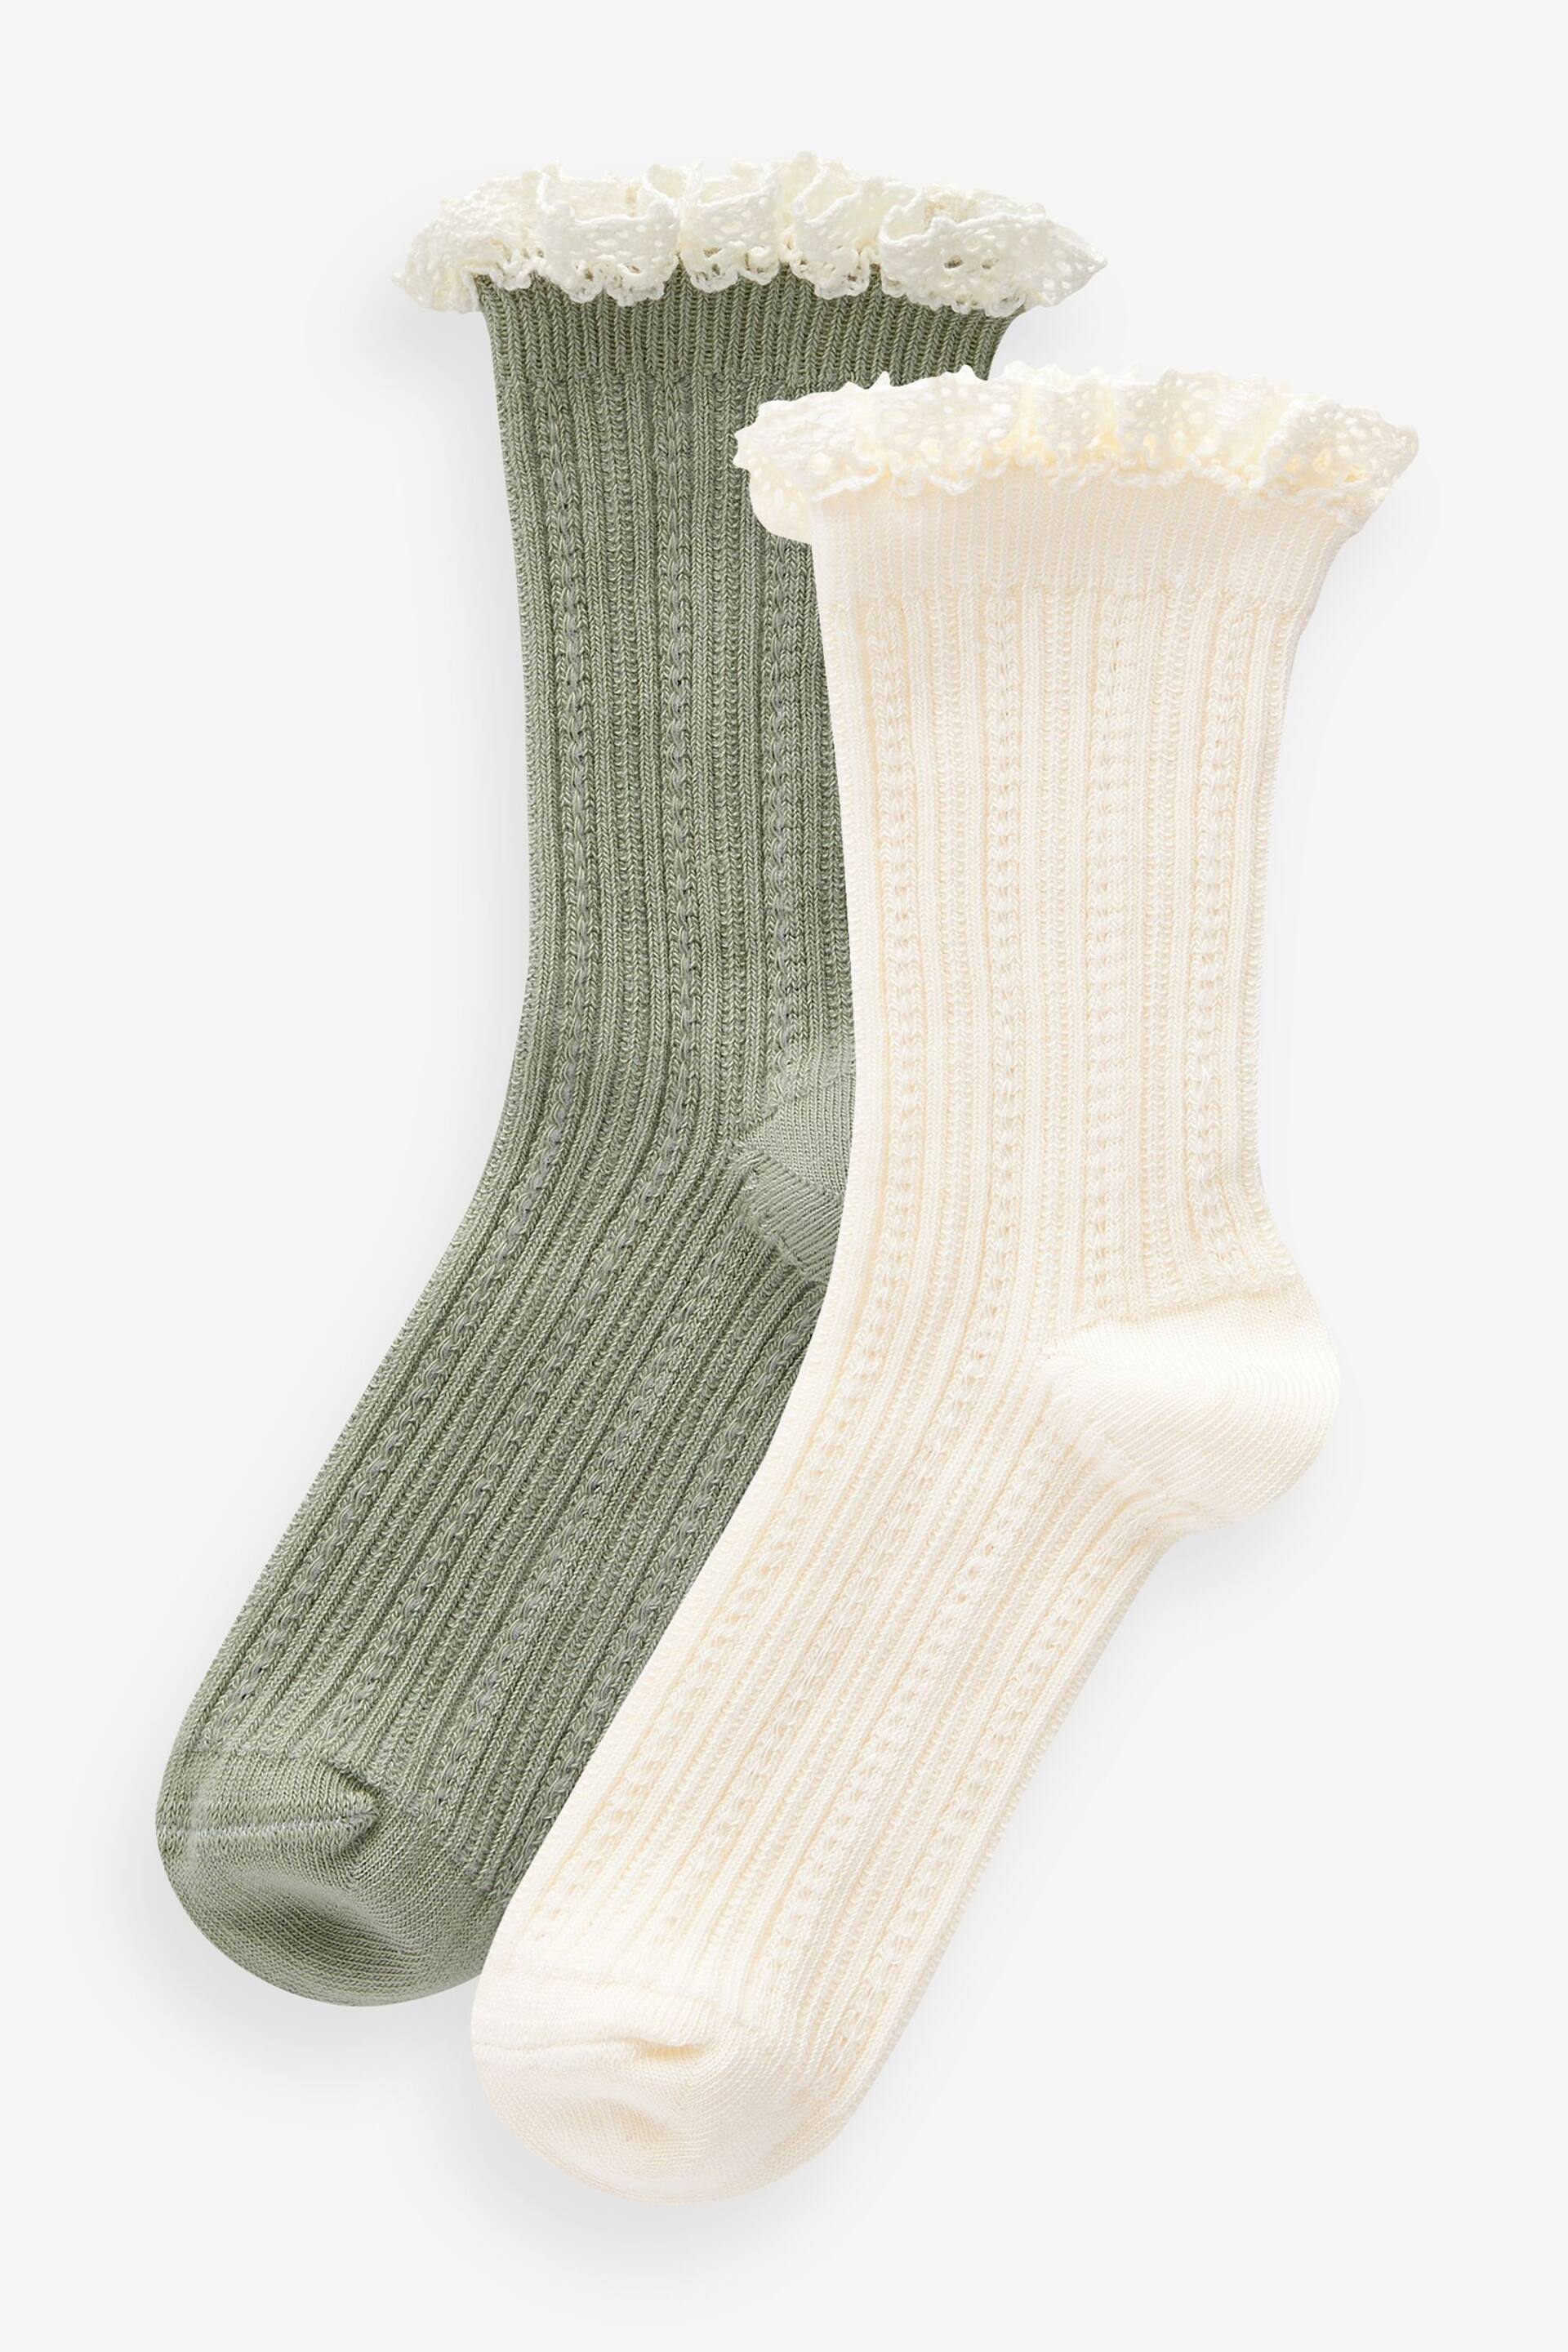 Cream and Green Cotton Rich Ruffle Frill Ankle Socks 2 Pack - Image 1 of 3